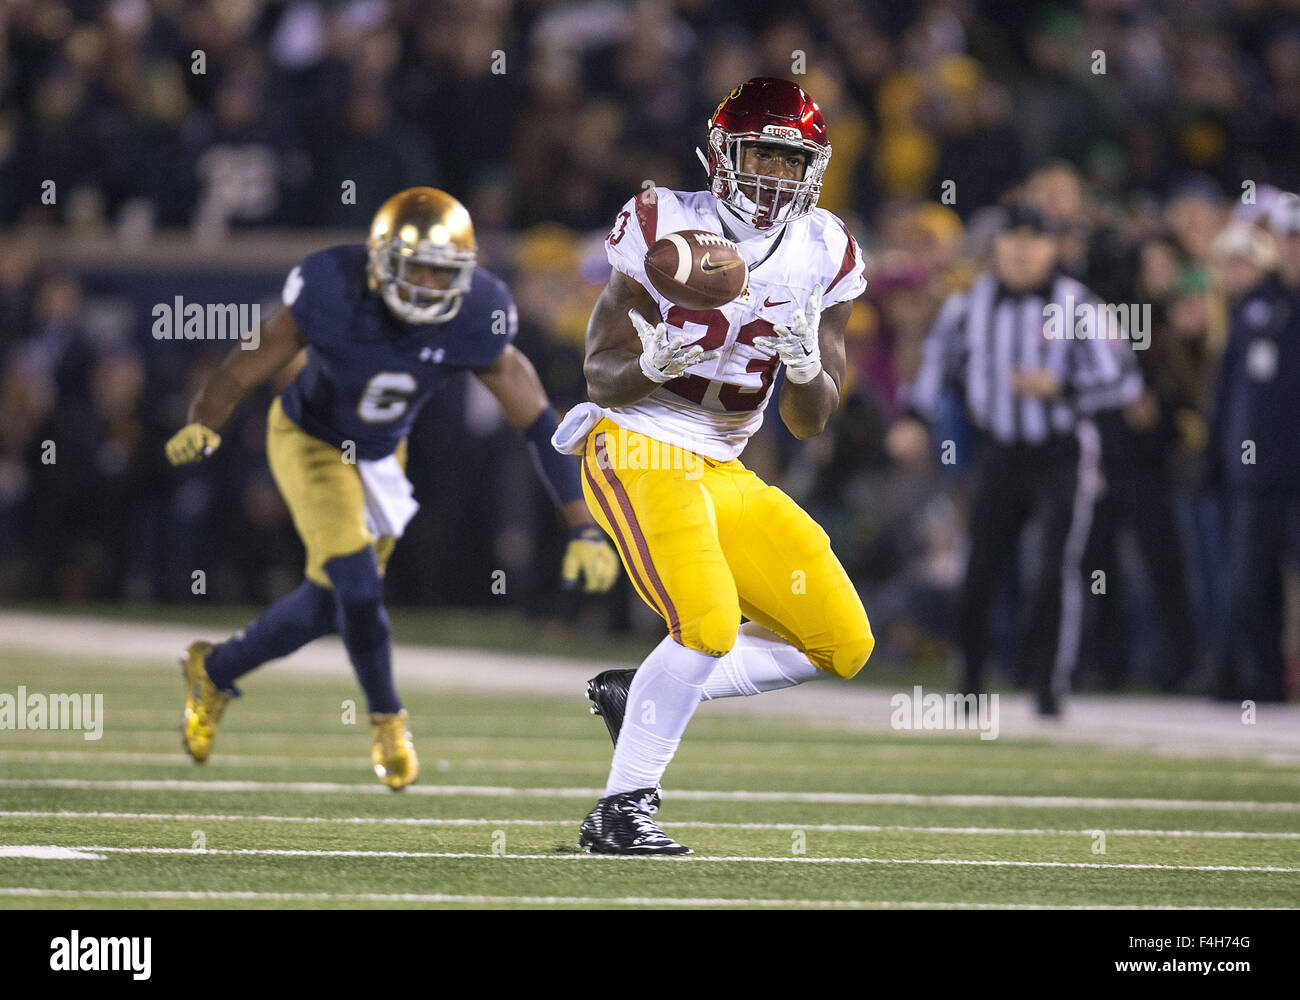 South Bend, Indiana, USA. 17th Oct, 2015. USC running back Tre Madden (23) catches the ball during NCAA football game action between the USC Trojans and the Notre Dame Fighting Irish at Notre Dame Stadium in South Bend, Indiana. Notre Dame defeated USC 41-31. John Mersits/CSM. © csm/Alamy Live News Stock Photo